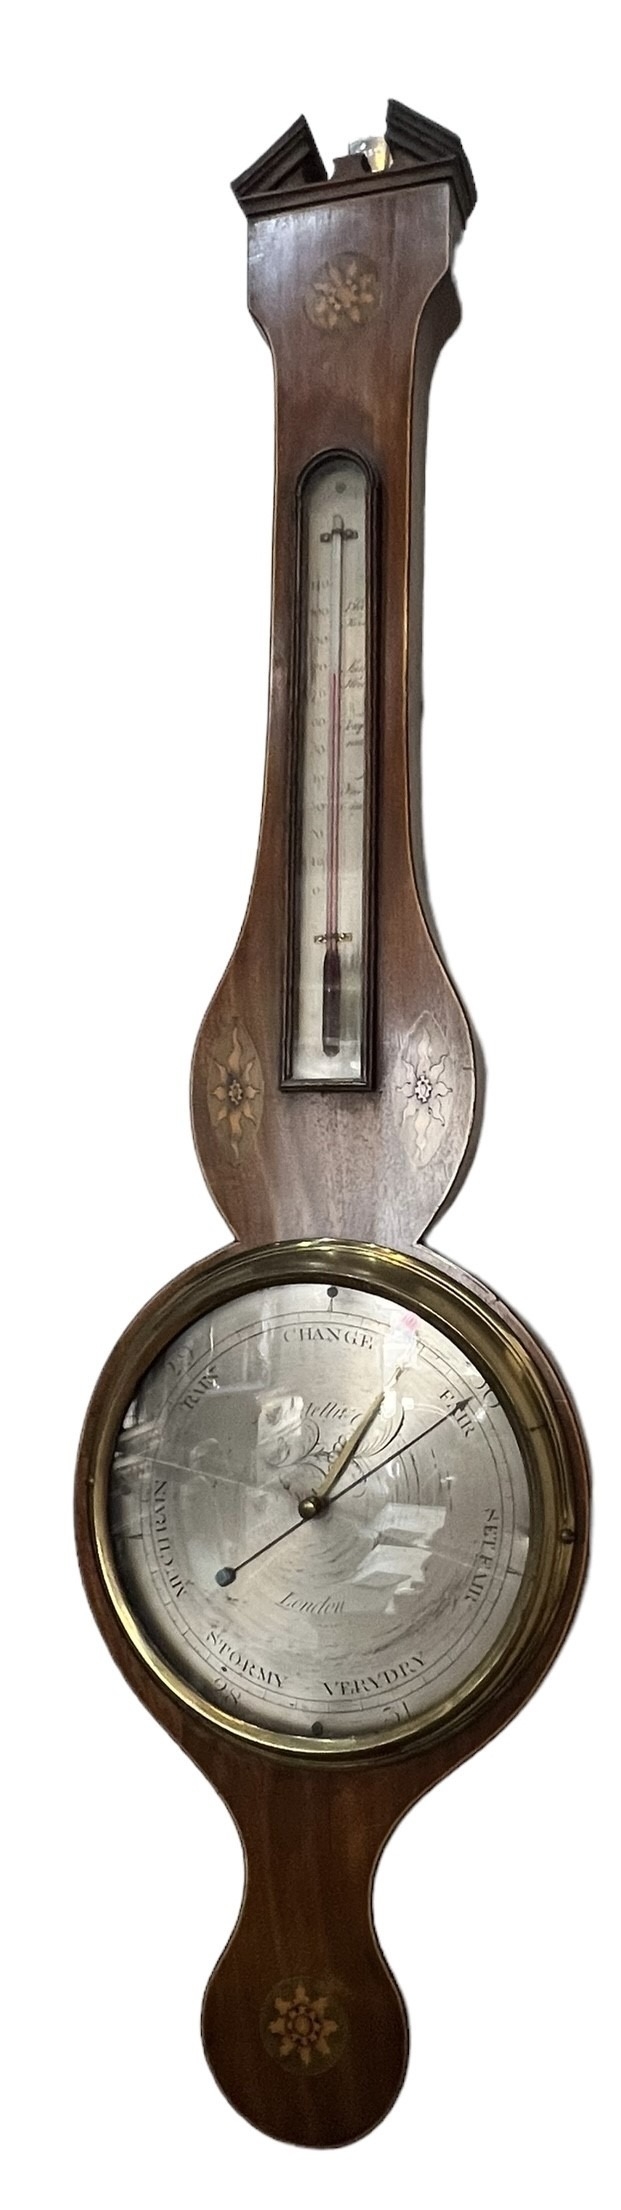 ORTELLI & CO., A GEORGE III INLAID MAHOGANY BANJO BAROMETER The dial signed Ortelli & Co., London, - Image 2 of 4